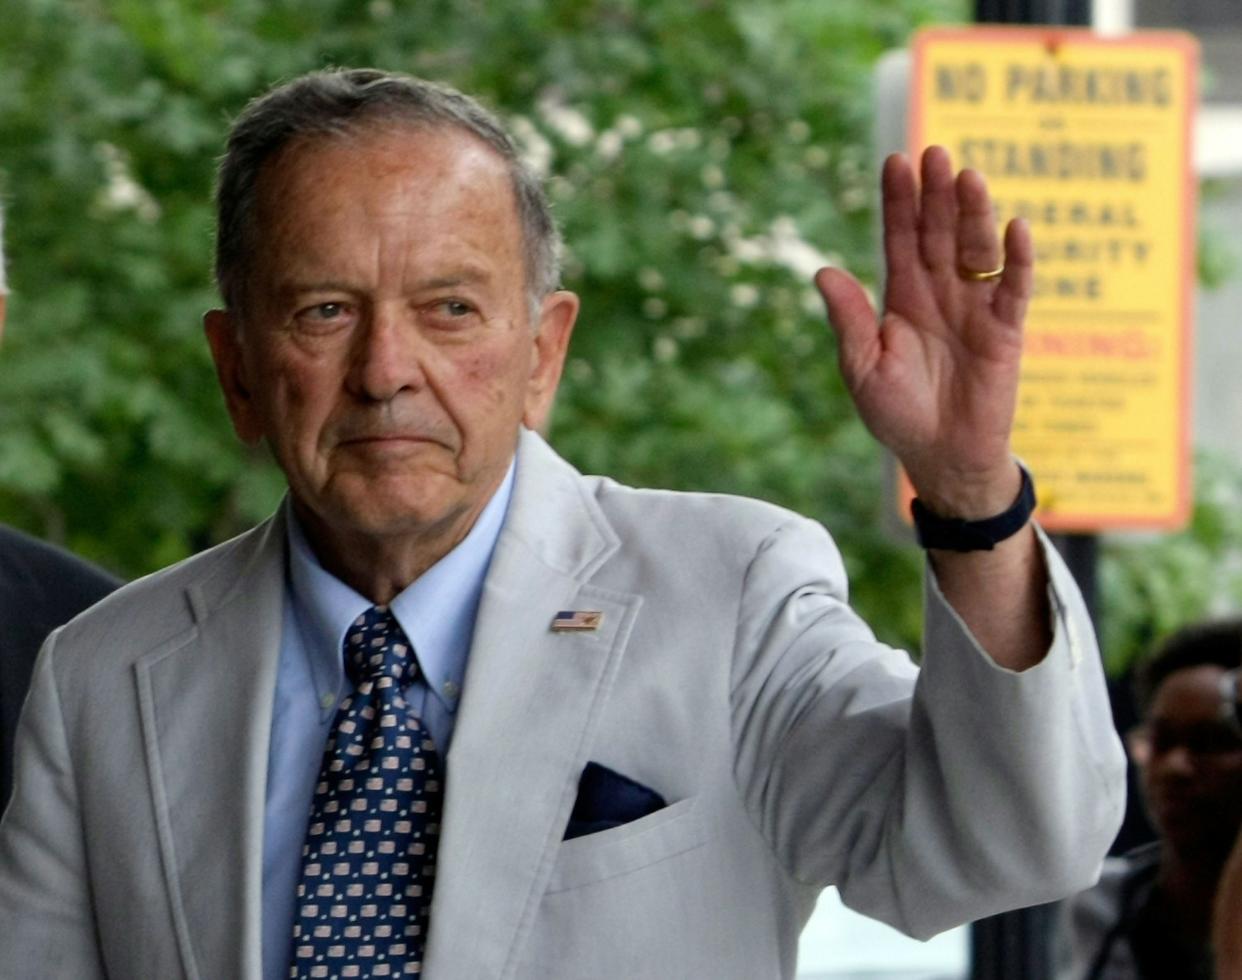 ORG XMIT: 82103340 WASHINGTON - JULY 31: (FILE PHOTO) U.S. Sen. Ted Stevens (R-AK) waves to cameras as he arrives at a U.S. district court for an arraignment July 31, 2008 in Washington, DC. Former Sen. Stevens (R-AK), along with former NASA Administrator Sean O'Keefe, is believed to be aboard an airplane carrying eight people that crashed August 10, 2010 in southwest Alaska. (Photo by Alex Wong/Getty Images) GTY ID: 03141